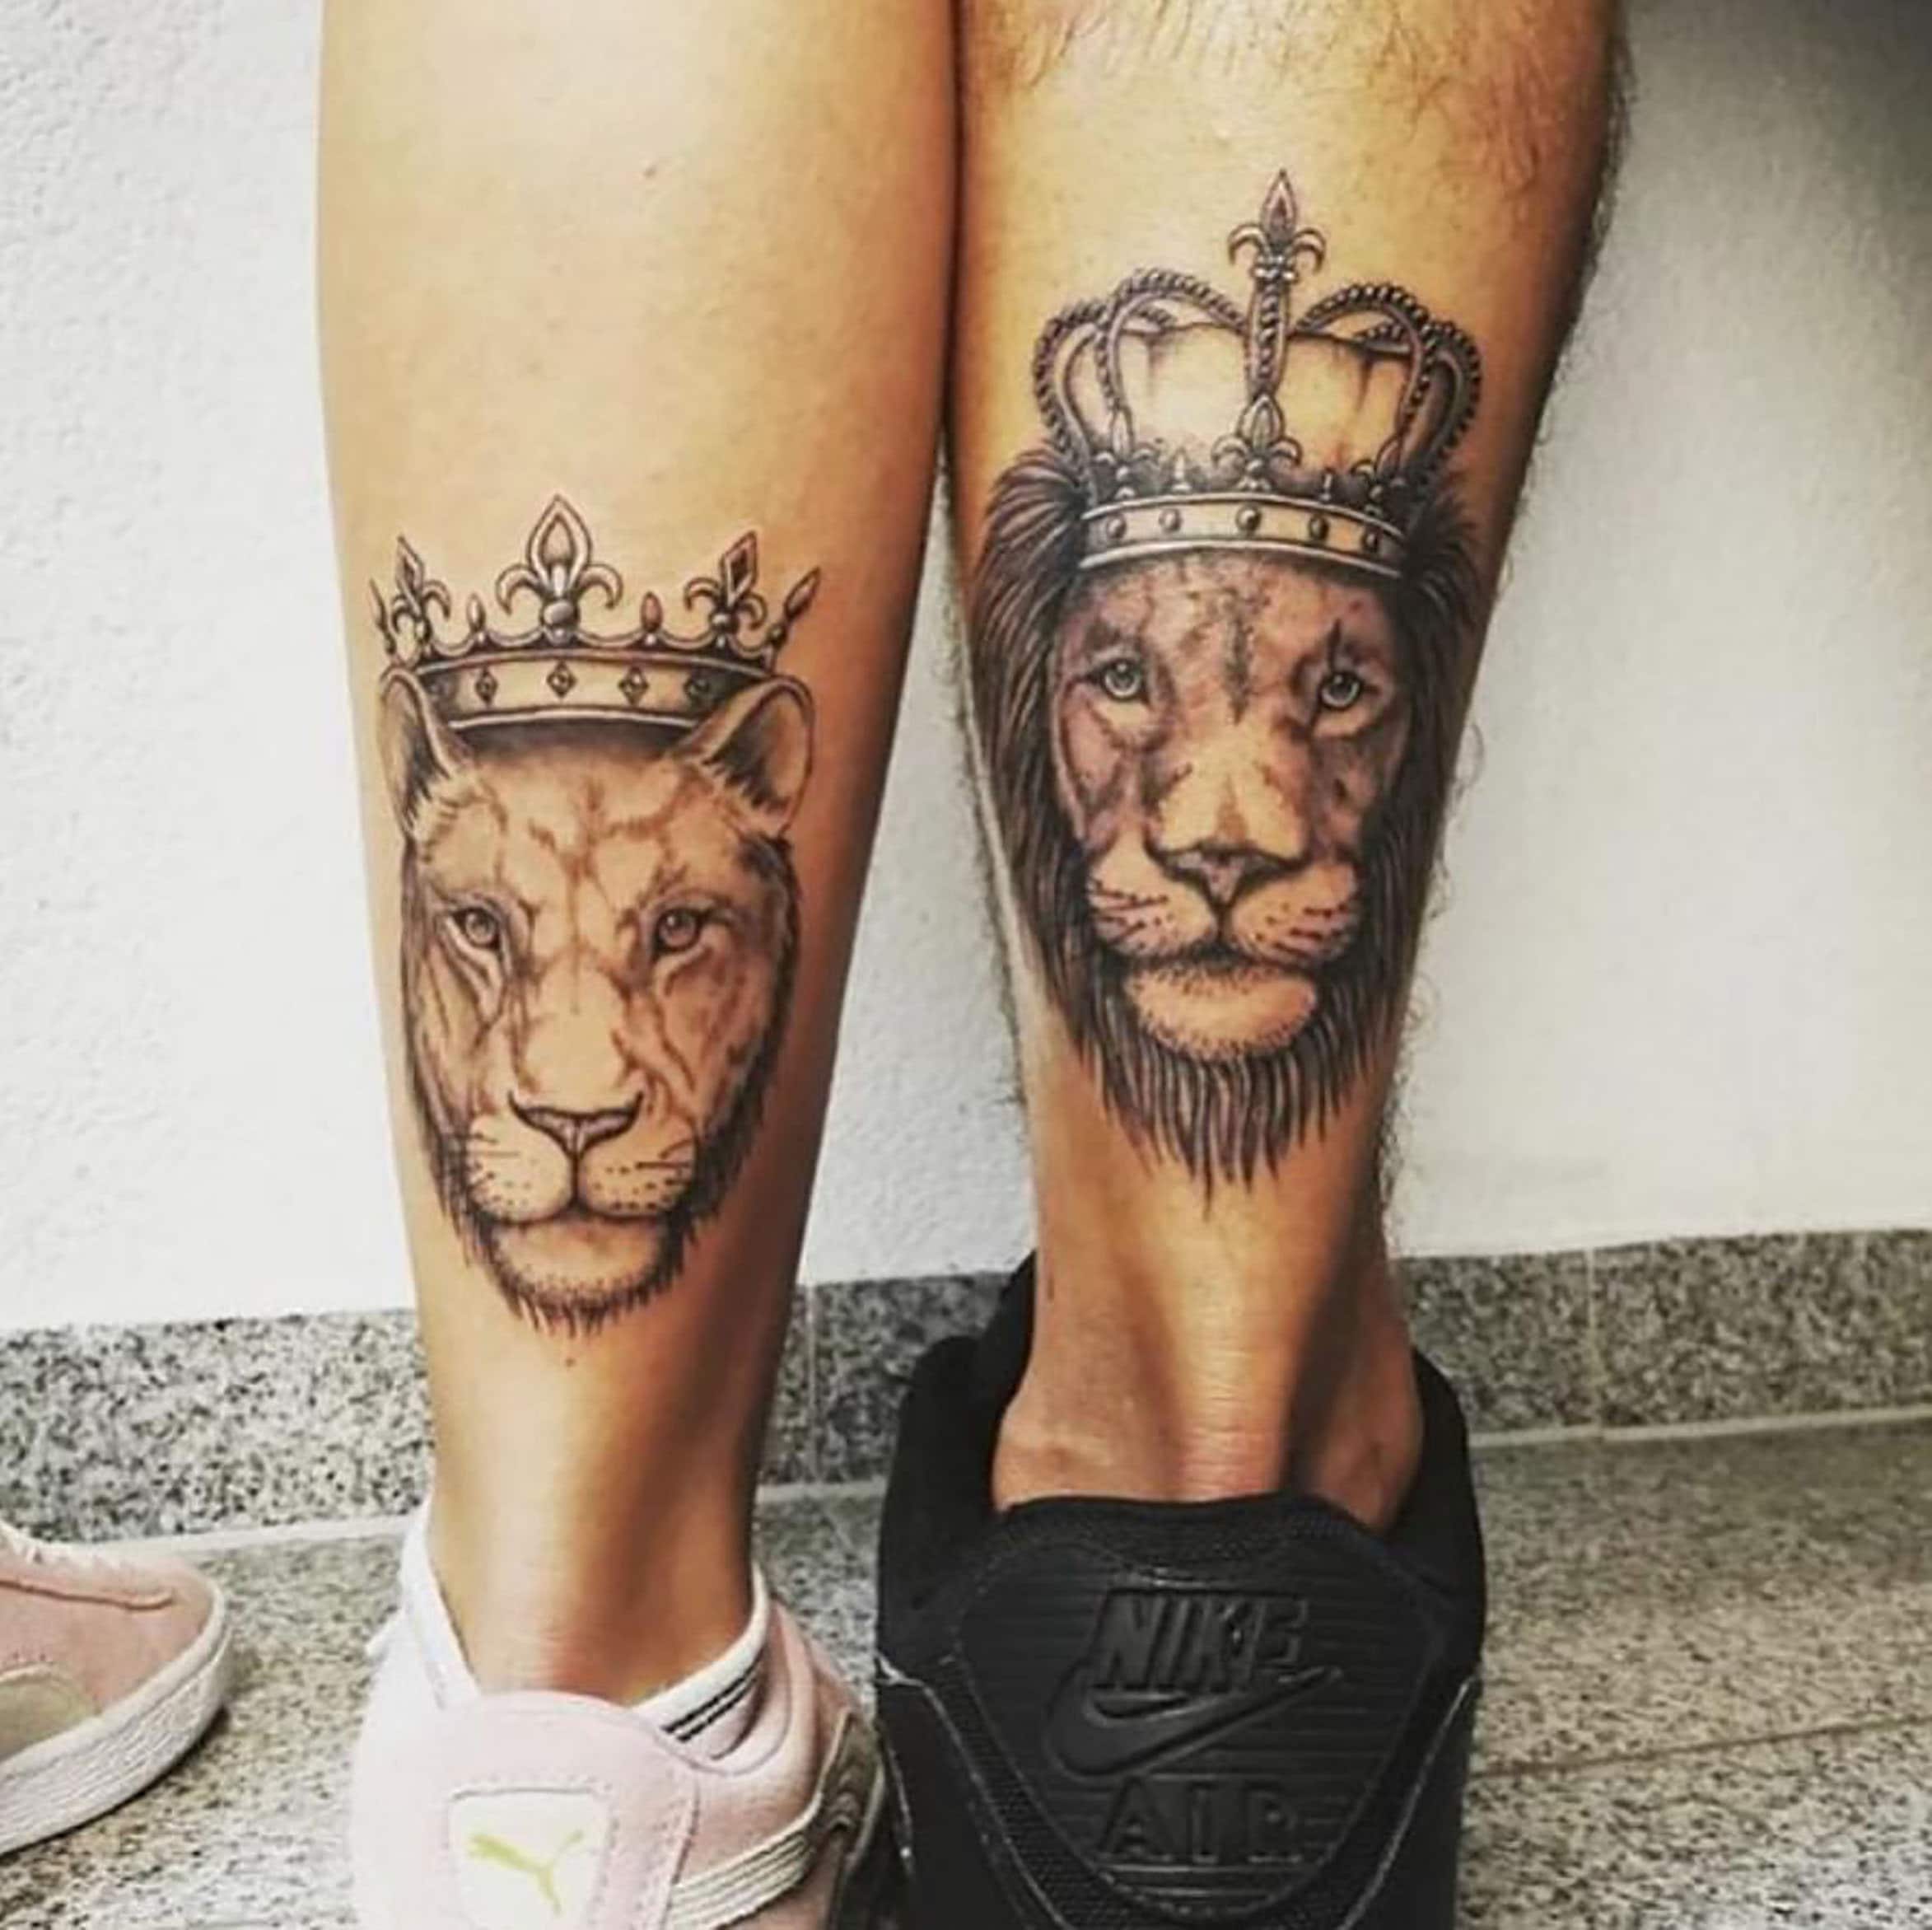 Lioness Tattoo Meaning: Symbolism and Significance Explained